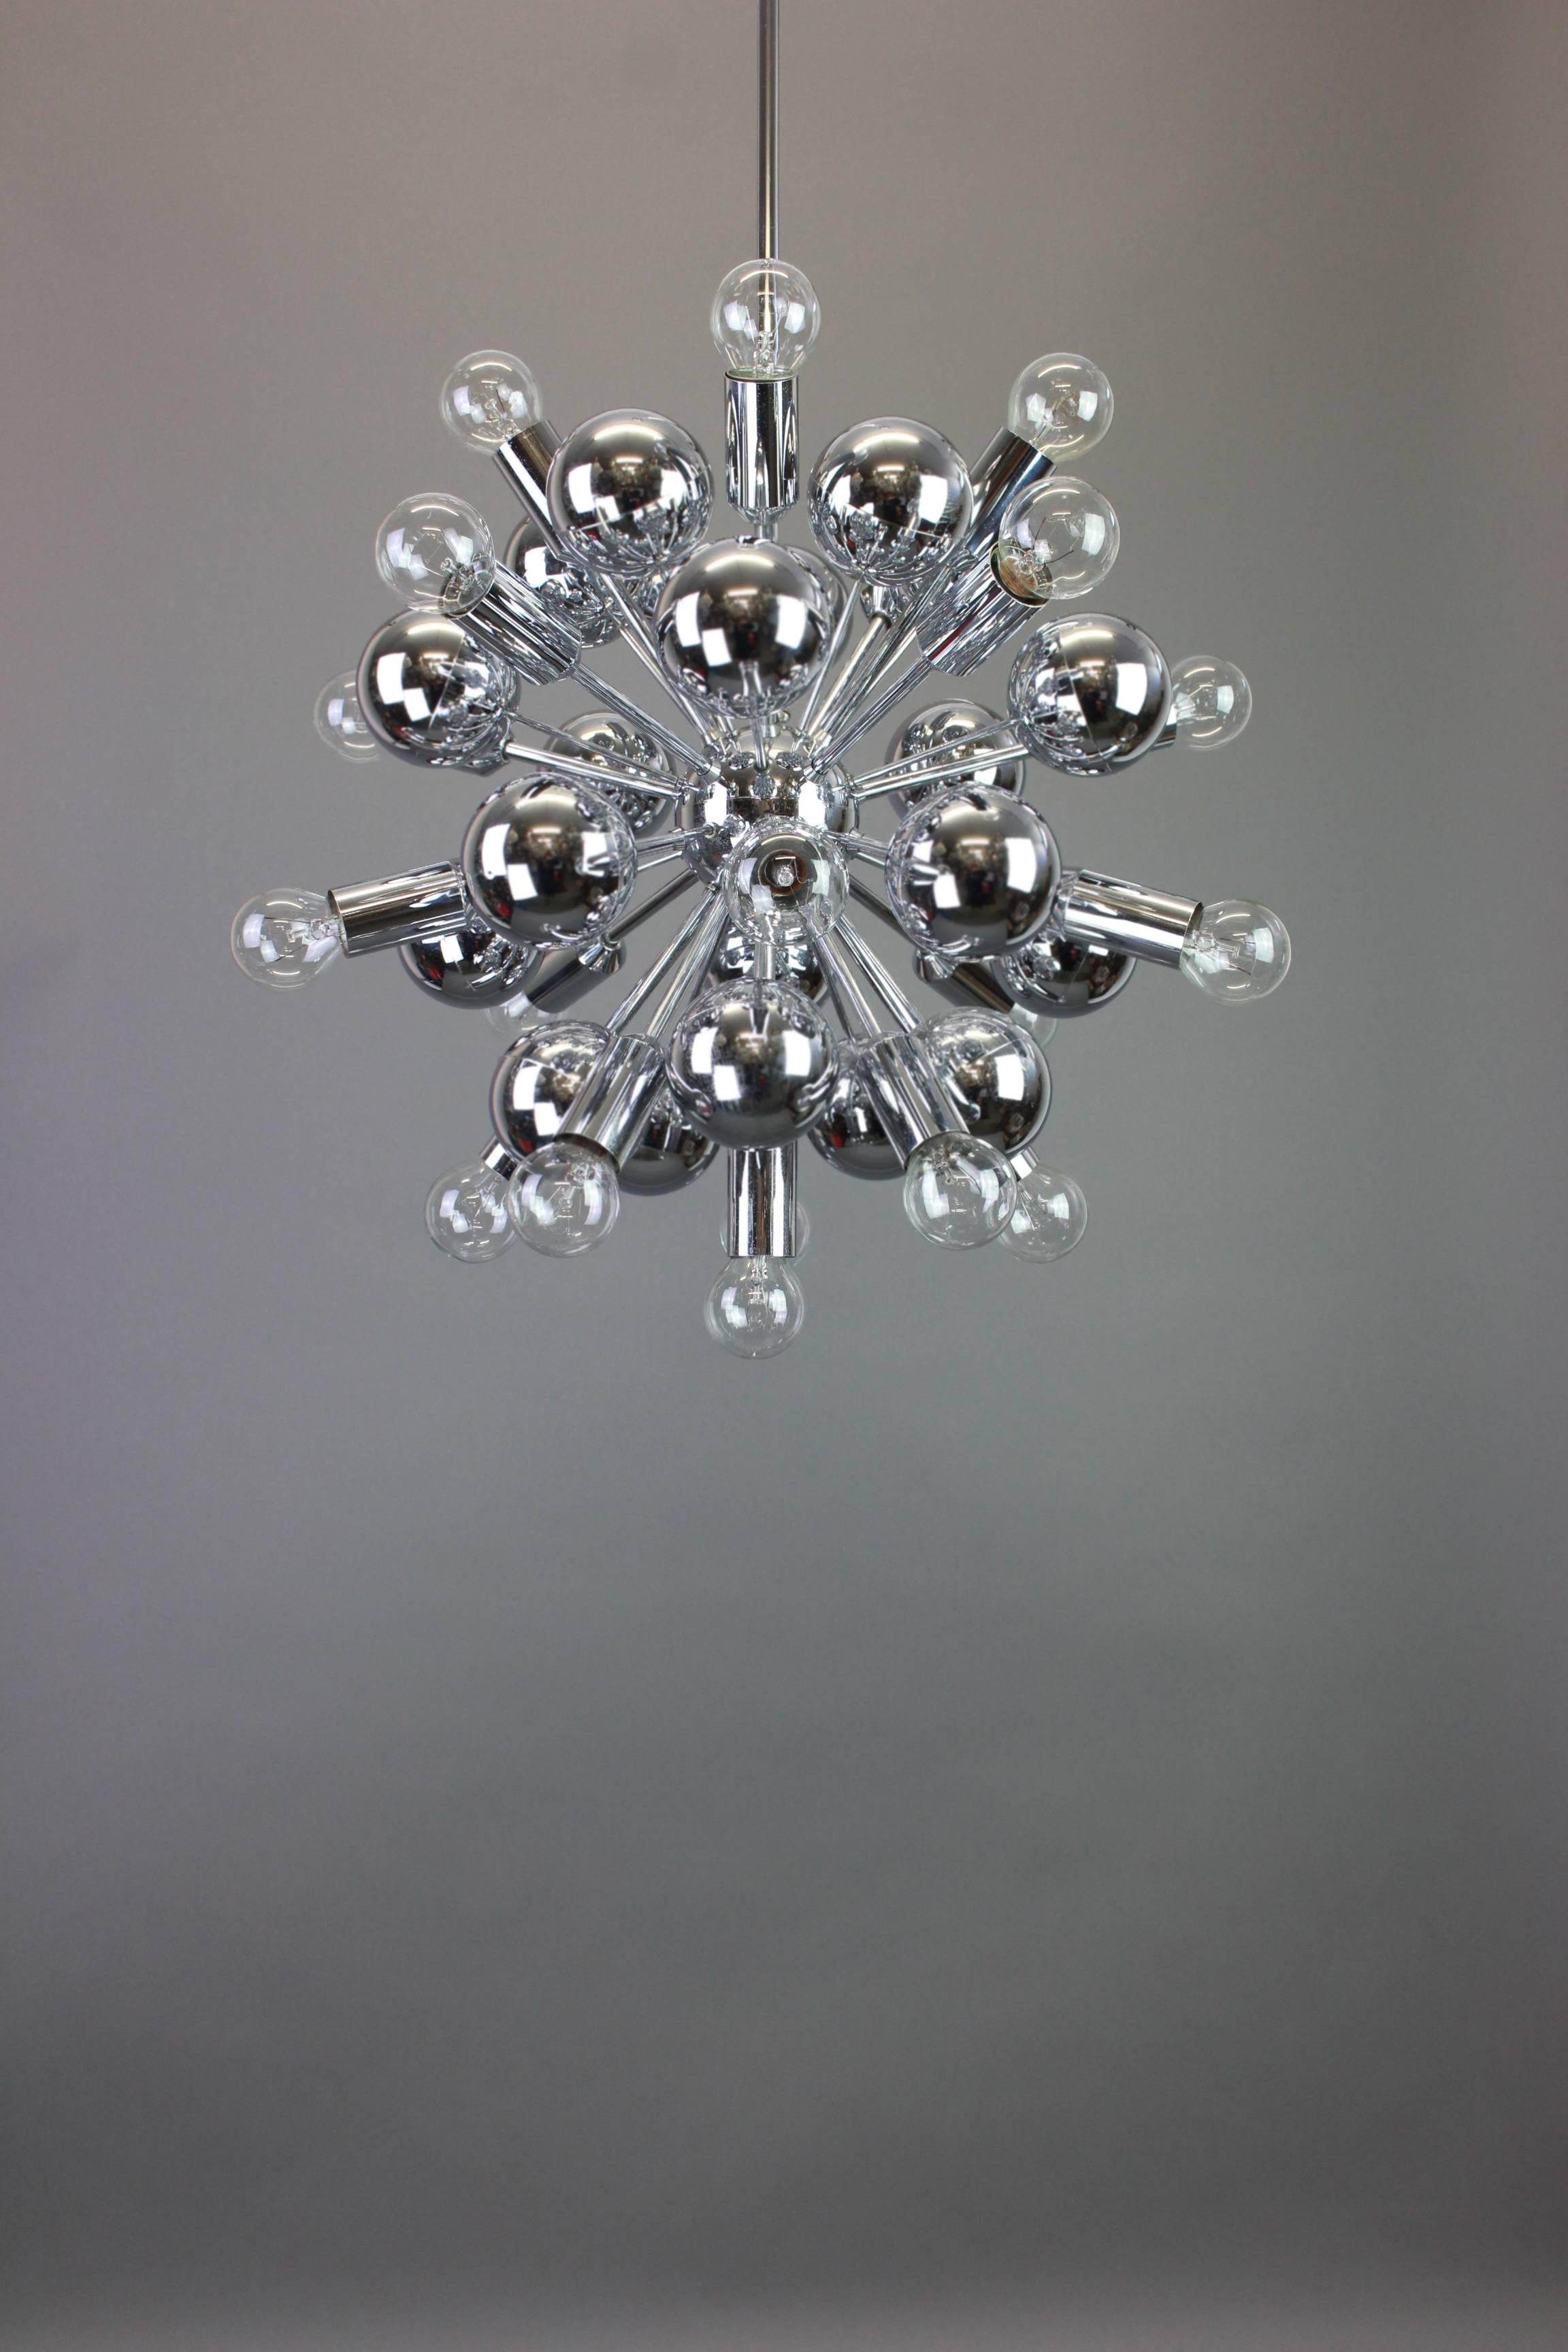 Mid-Century Modern Large Chrome Space Age Sputnik Chandelier by Cosack, Germany, 1970s For Sale